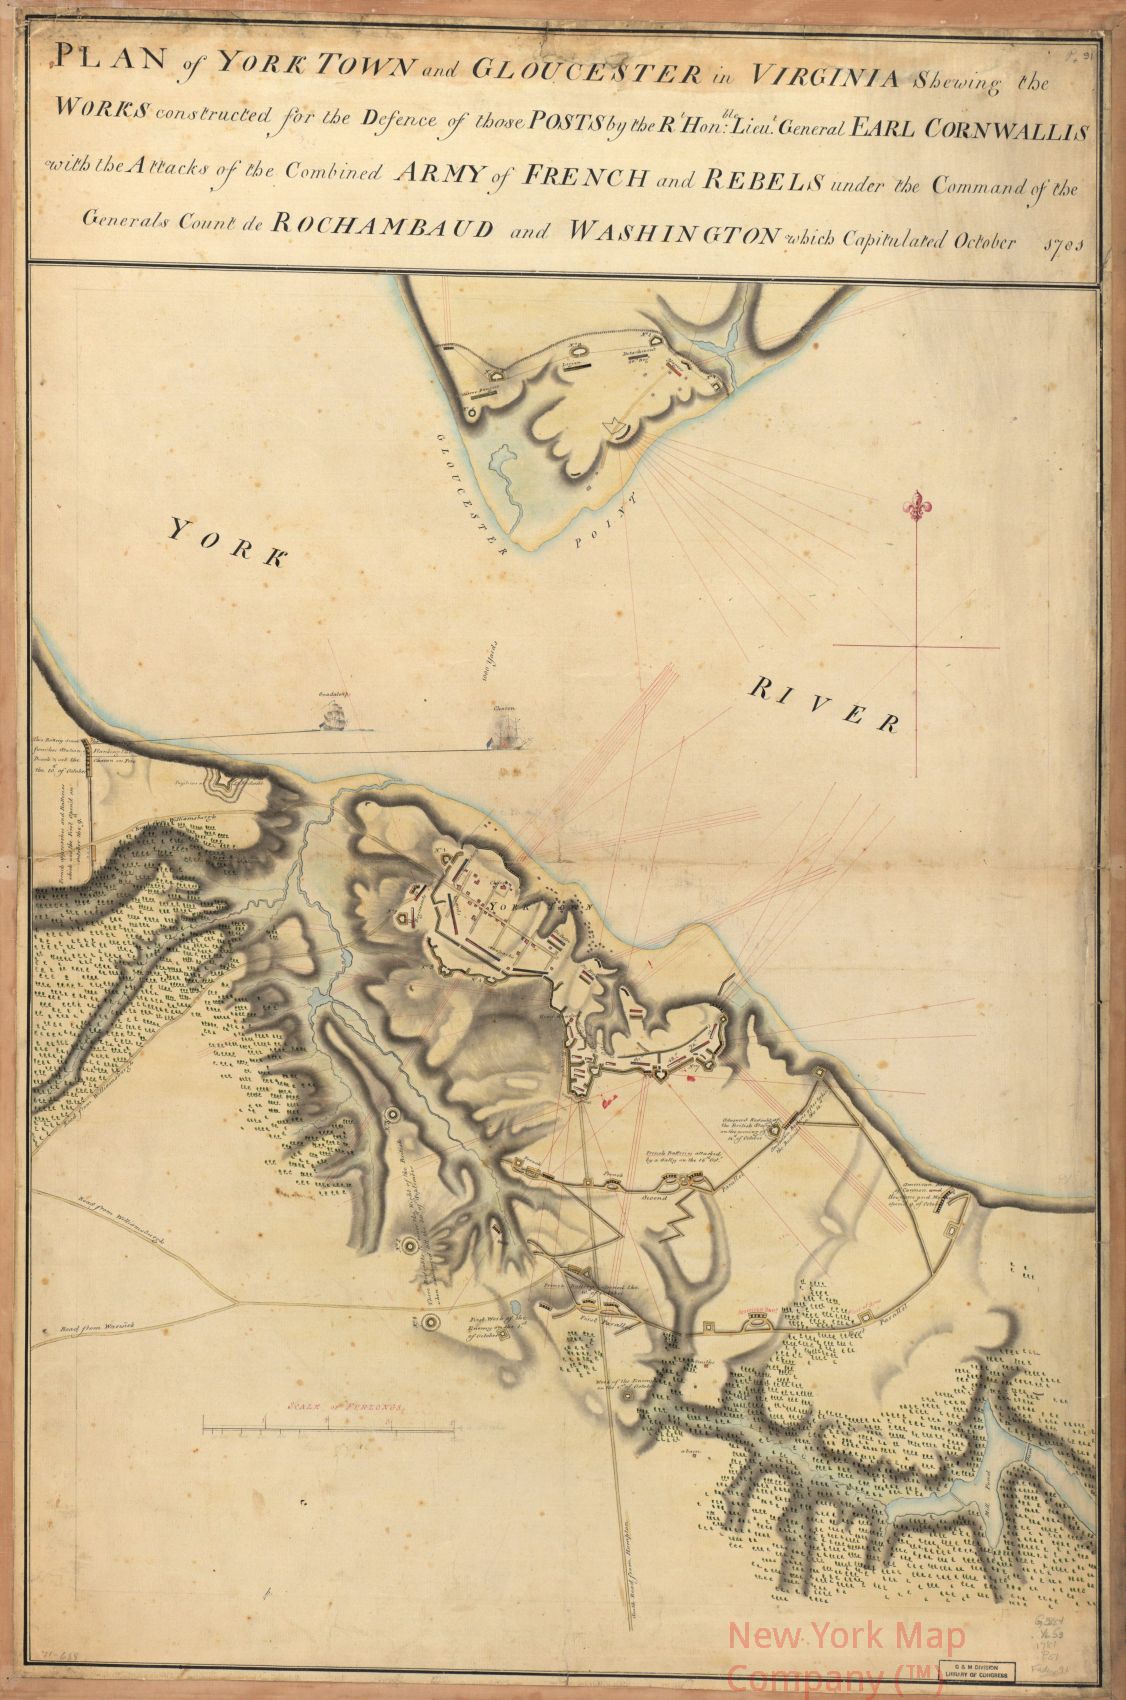 1781 map Plan of York Town and Gloucester in Virginia, shewing the works constructed for the defence of those posts by the Rt. Honble: Lieut. General Earl Cornwallis, with the attacks of the combined army of French and rebels under the command of the Gen